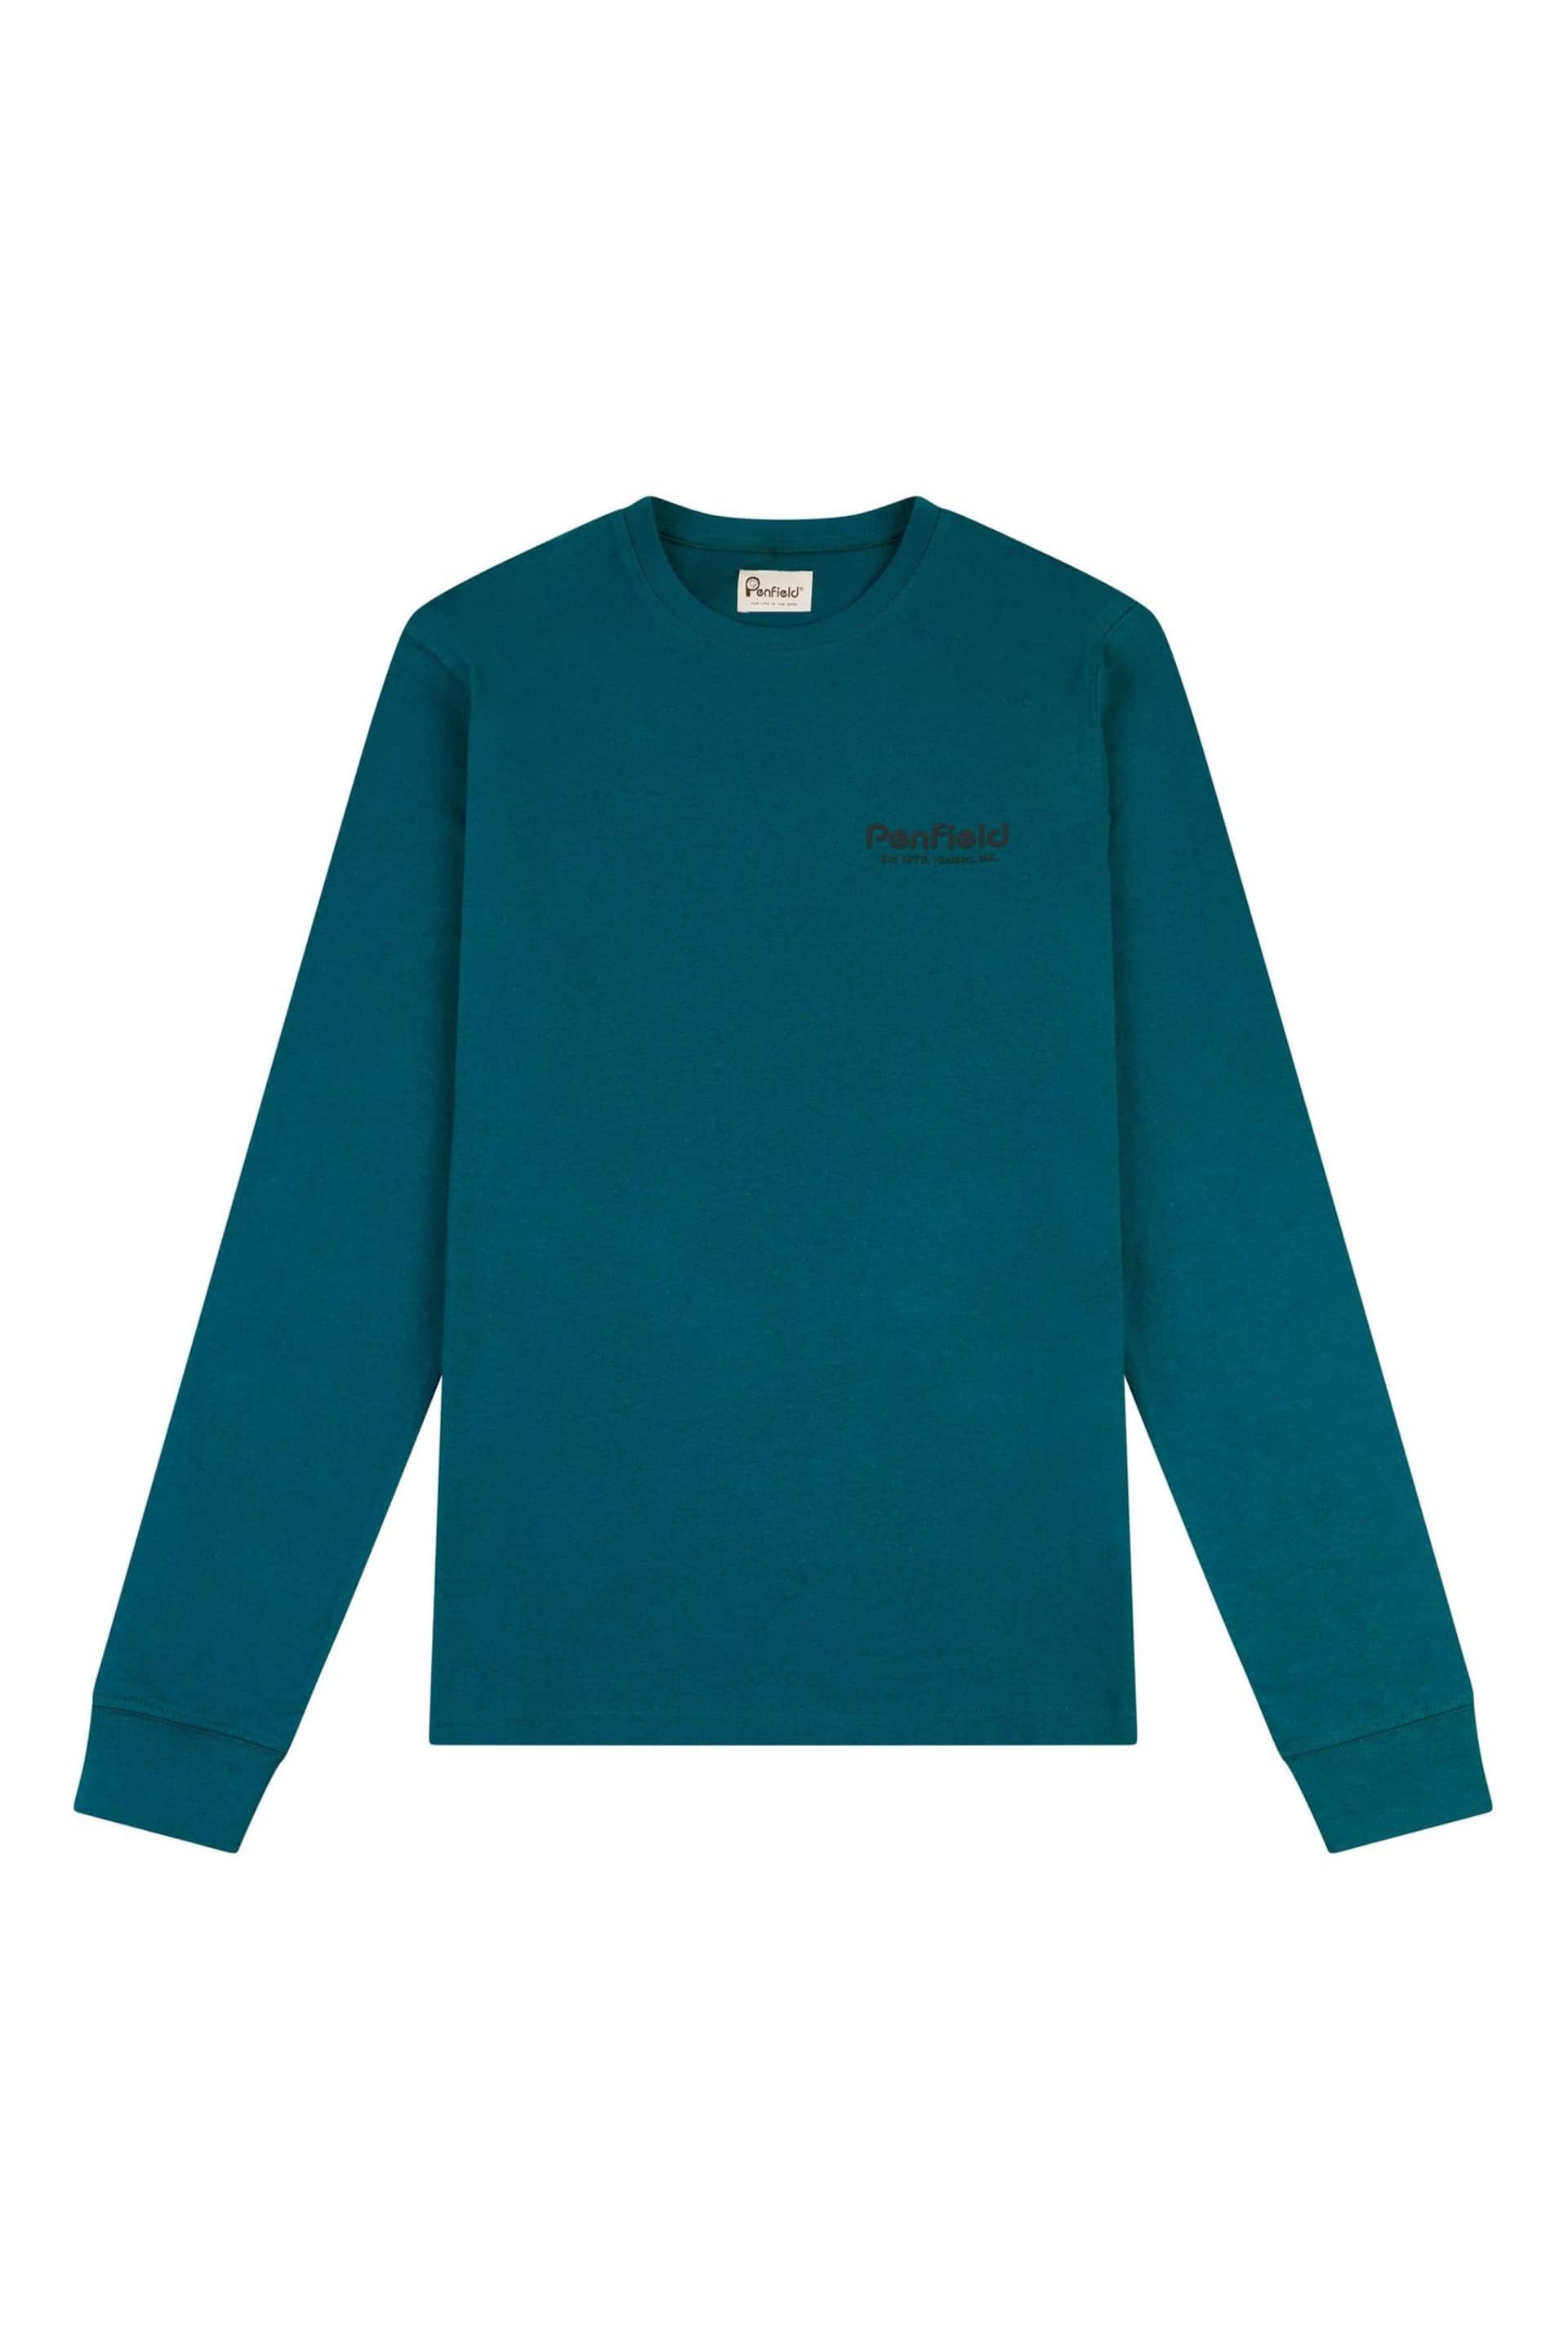 Penfield Blue Sketch Mountain Back Graphic Long-Sleeved T-Shirt - Image 4 of 7